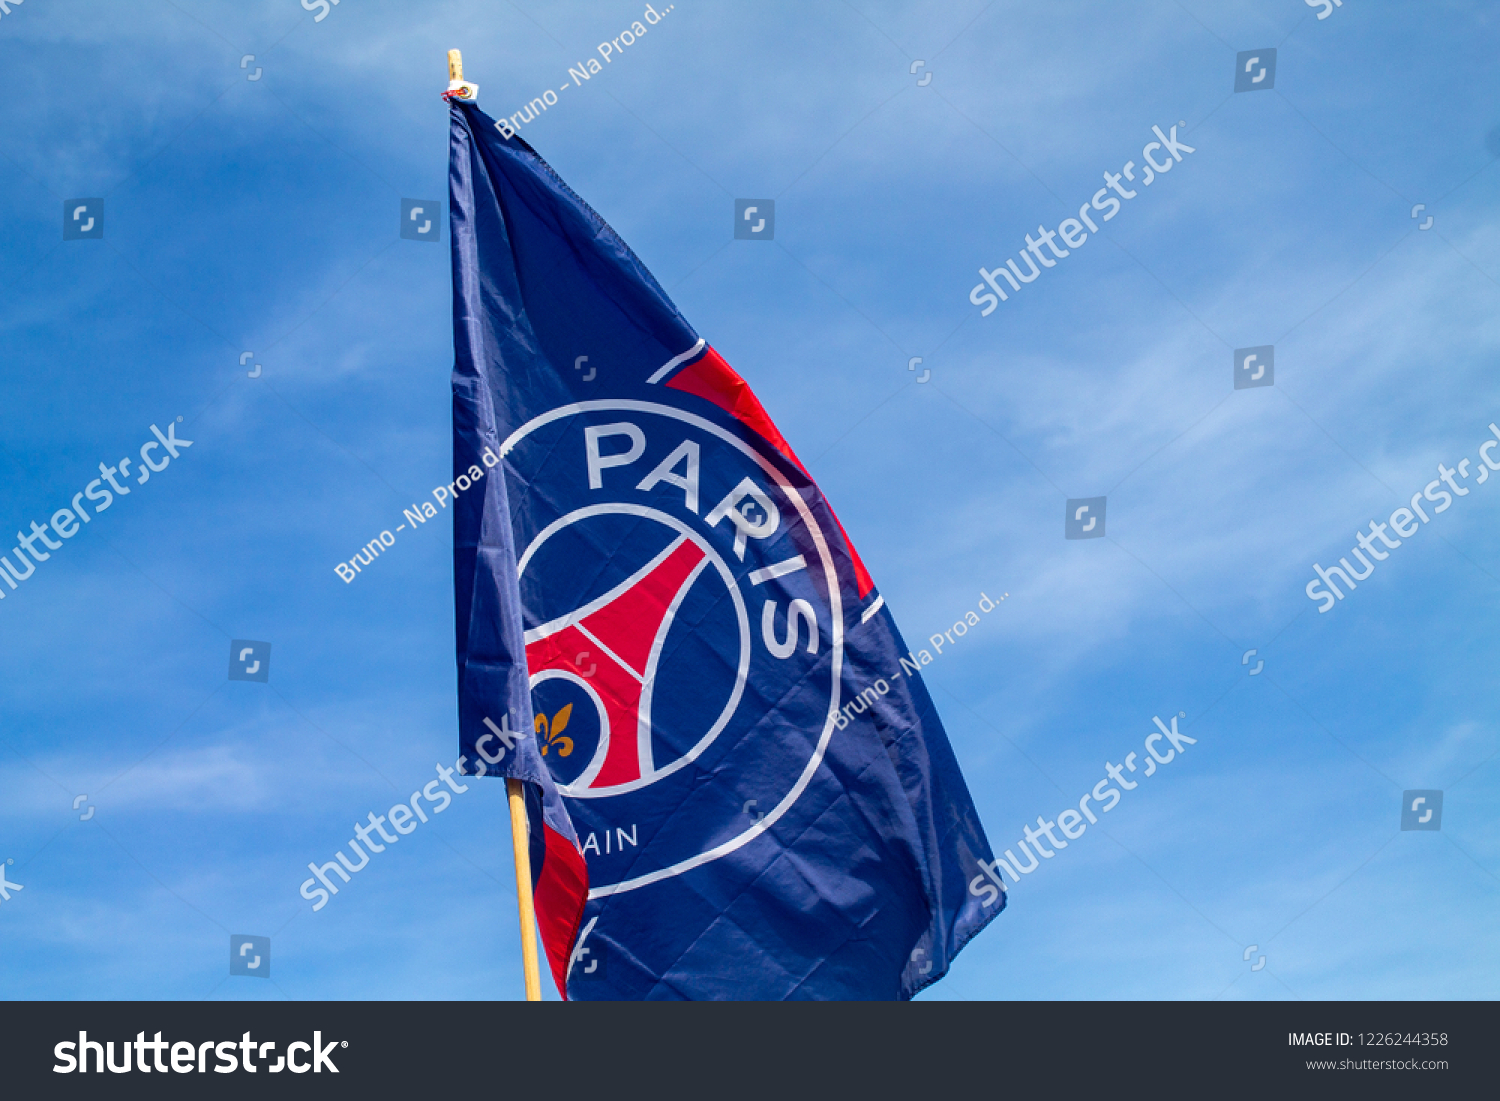 Paris Saint-Germain Football Club. The flag of PSG with a blue sky and clouds on the background in Paris, France. An UEFA Champions League team. #1226244358